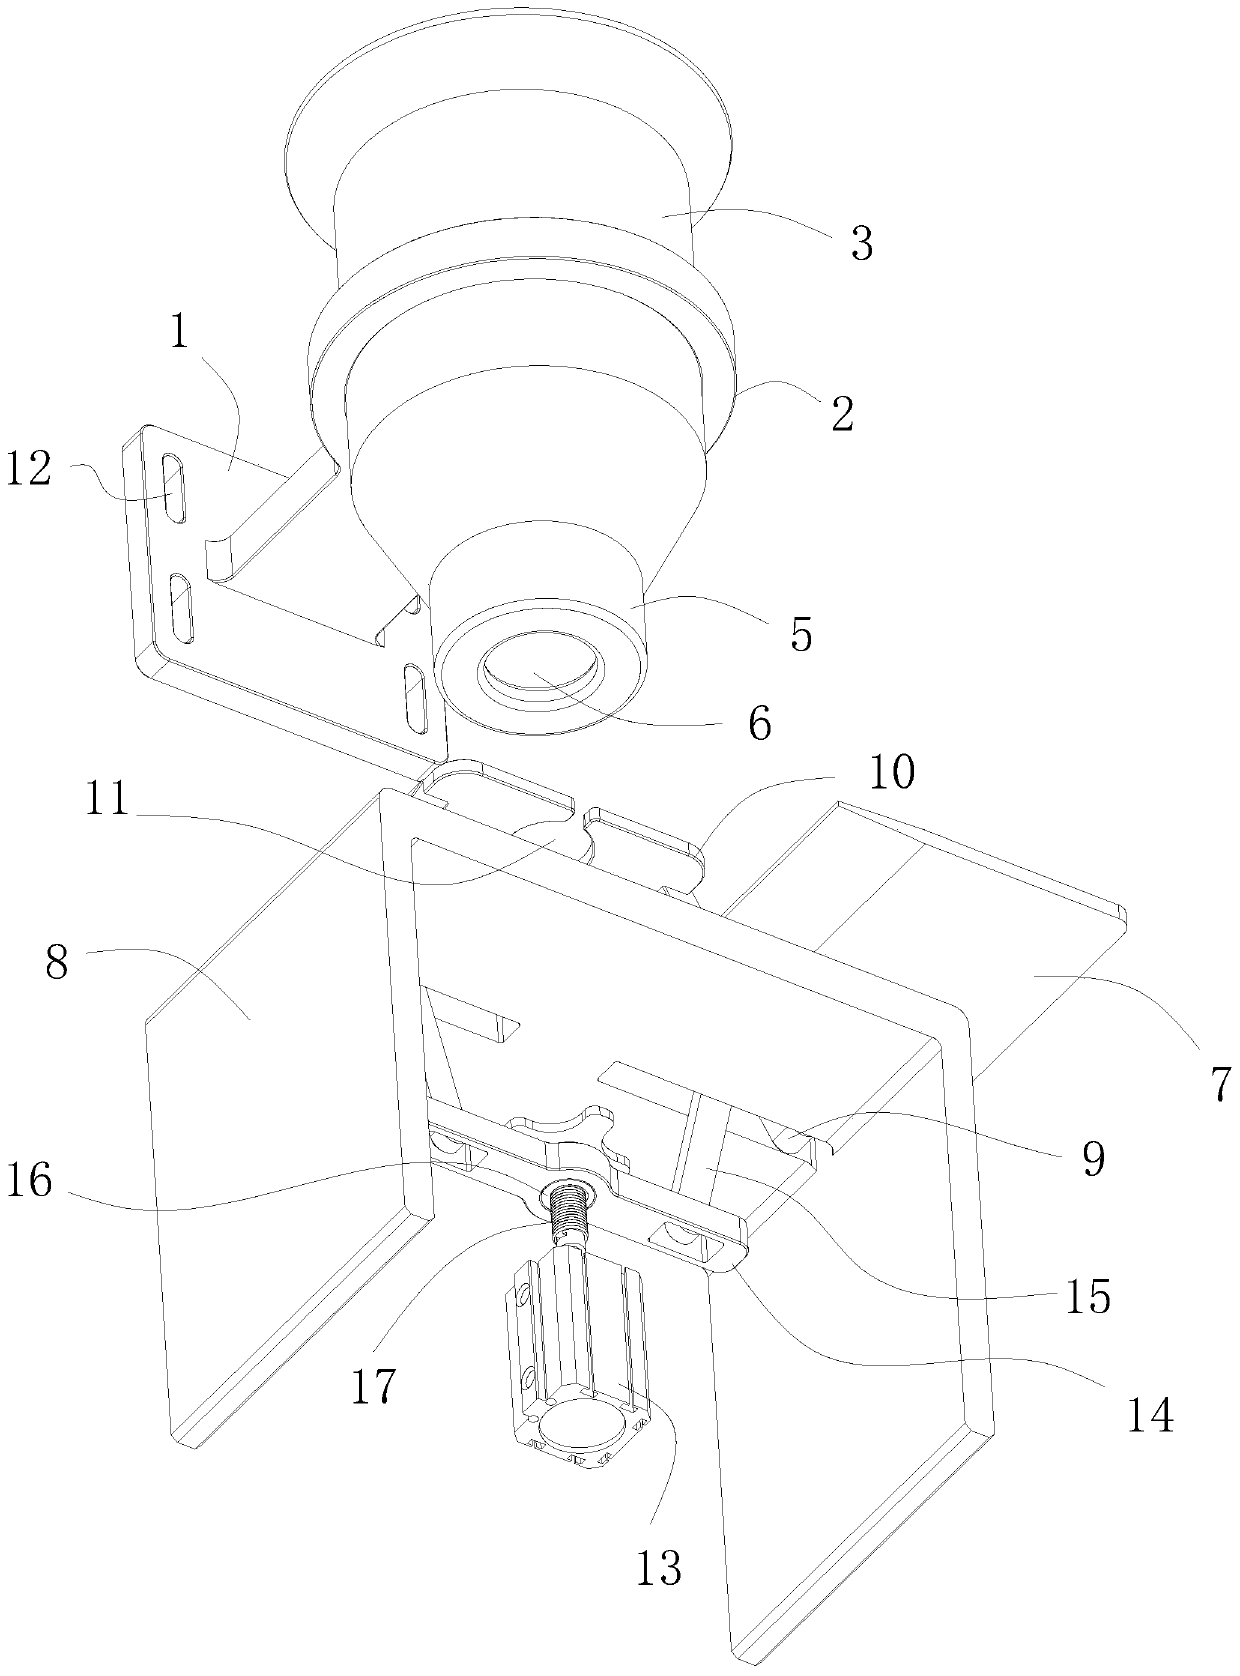 Efficient head removal device for poultry processing